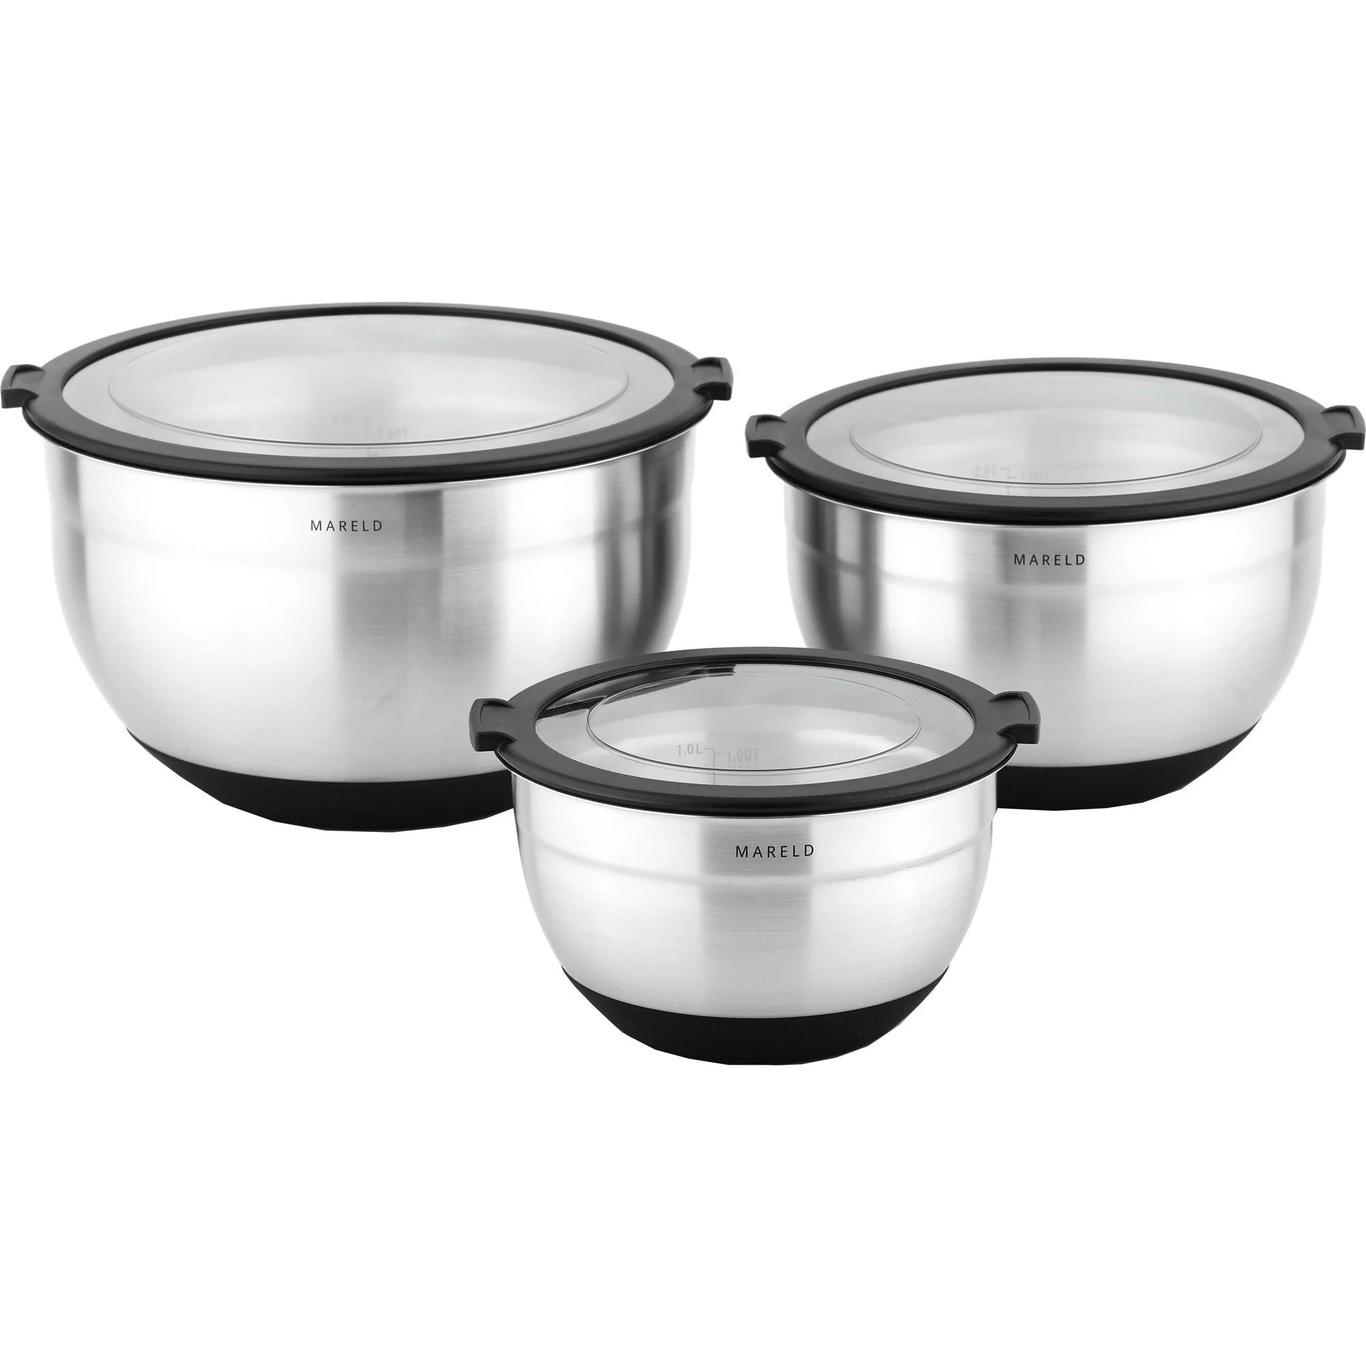 https://royaldesign.com/image/2/mareld-mareld-stainless-steel-mixing-bowl-with-lid-3pcs-0?w=800&quality=80